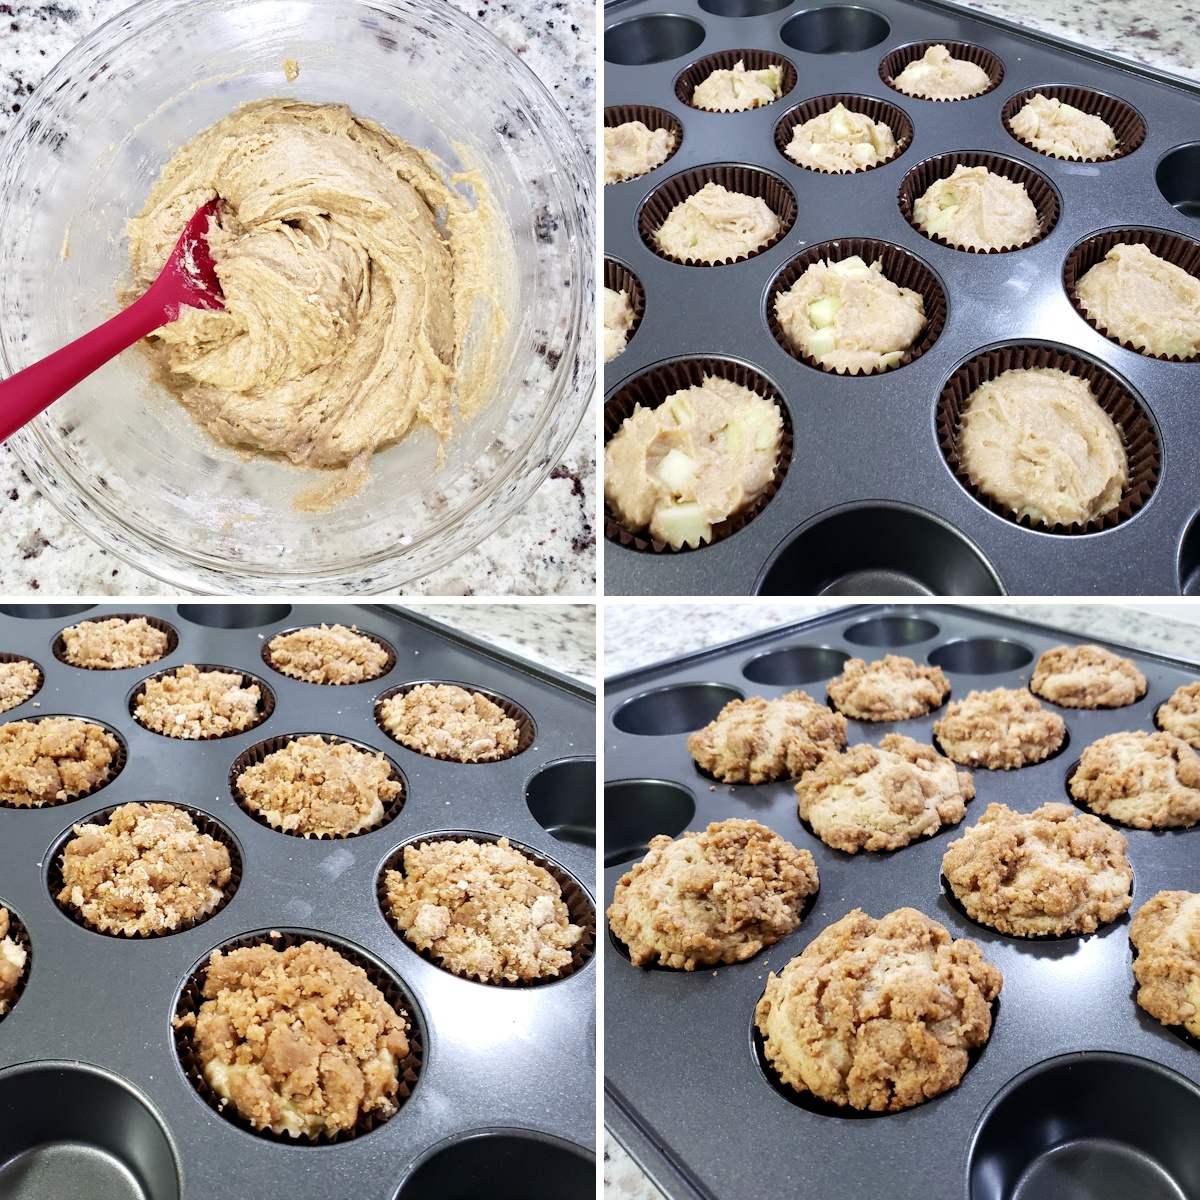 Mixing muffin batter and adding to a muffin pan.